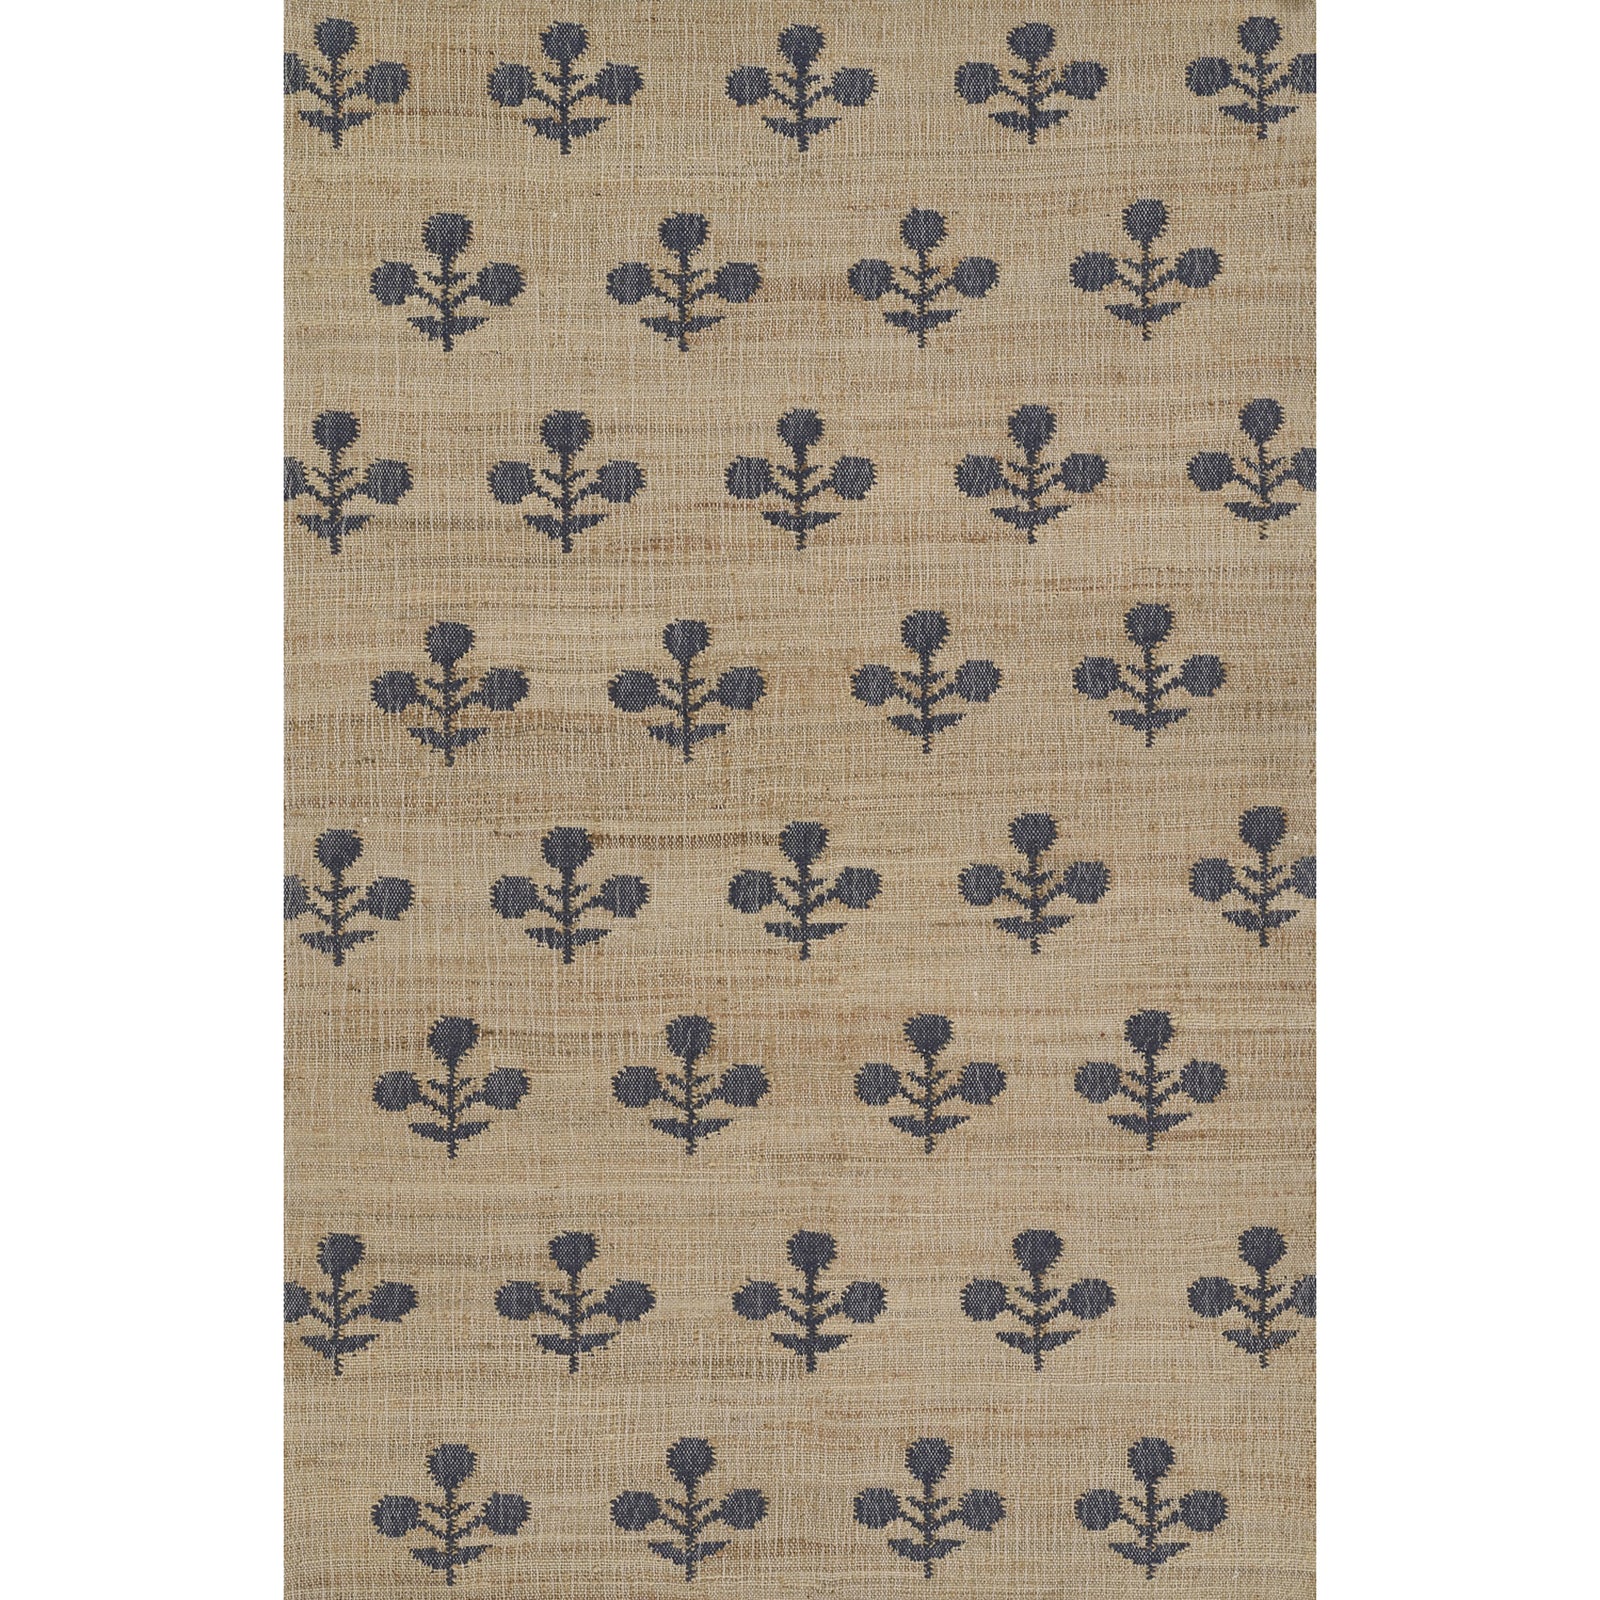 Erin Gates by Momeni Orchard Bloom Blue Hand Woven Wool and Jute Area Rug